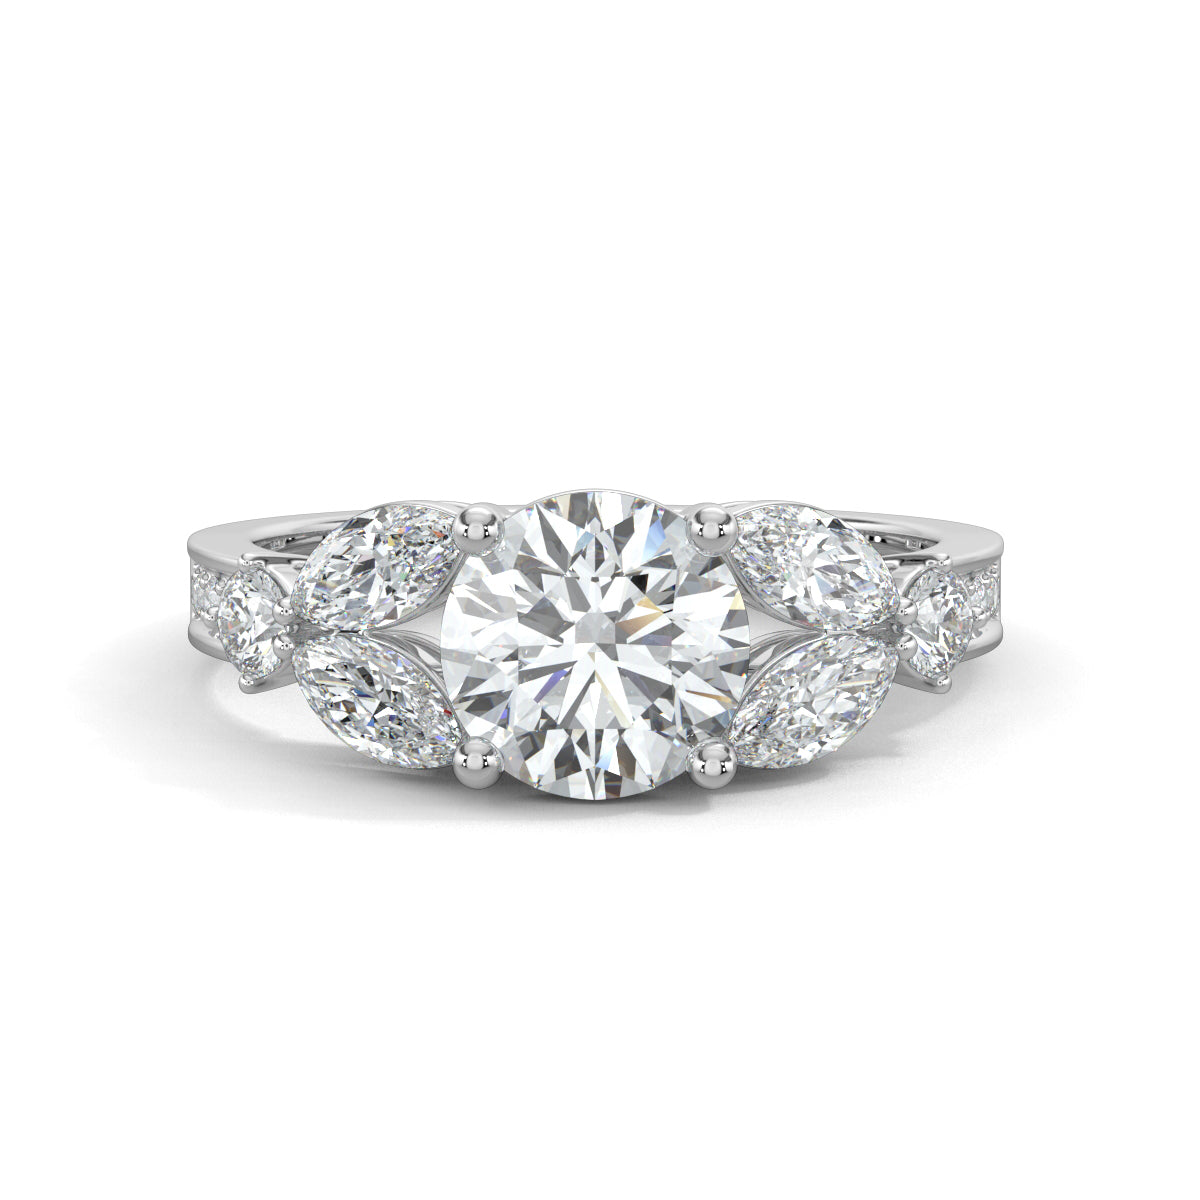 White Gold, Diamond Ring, Round solitaire ring, Marquise diamonds, Natural diamonds, Lab-grown diamonds, Pave diamonds, Ethical jewelry, Classic band, Timeless elegance